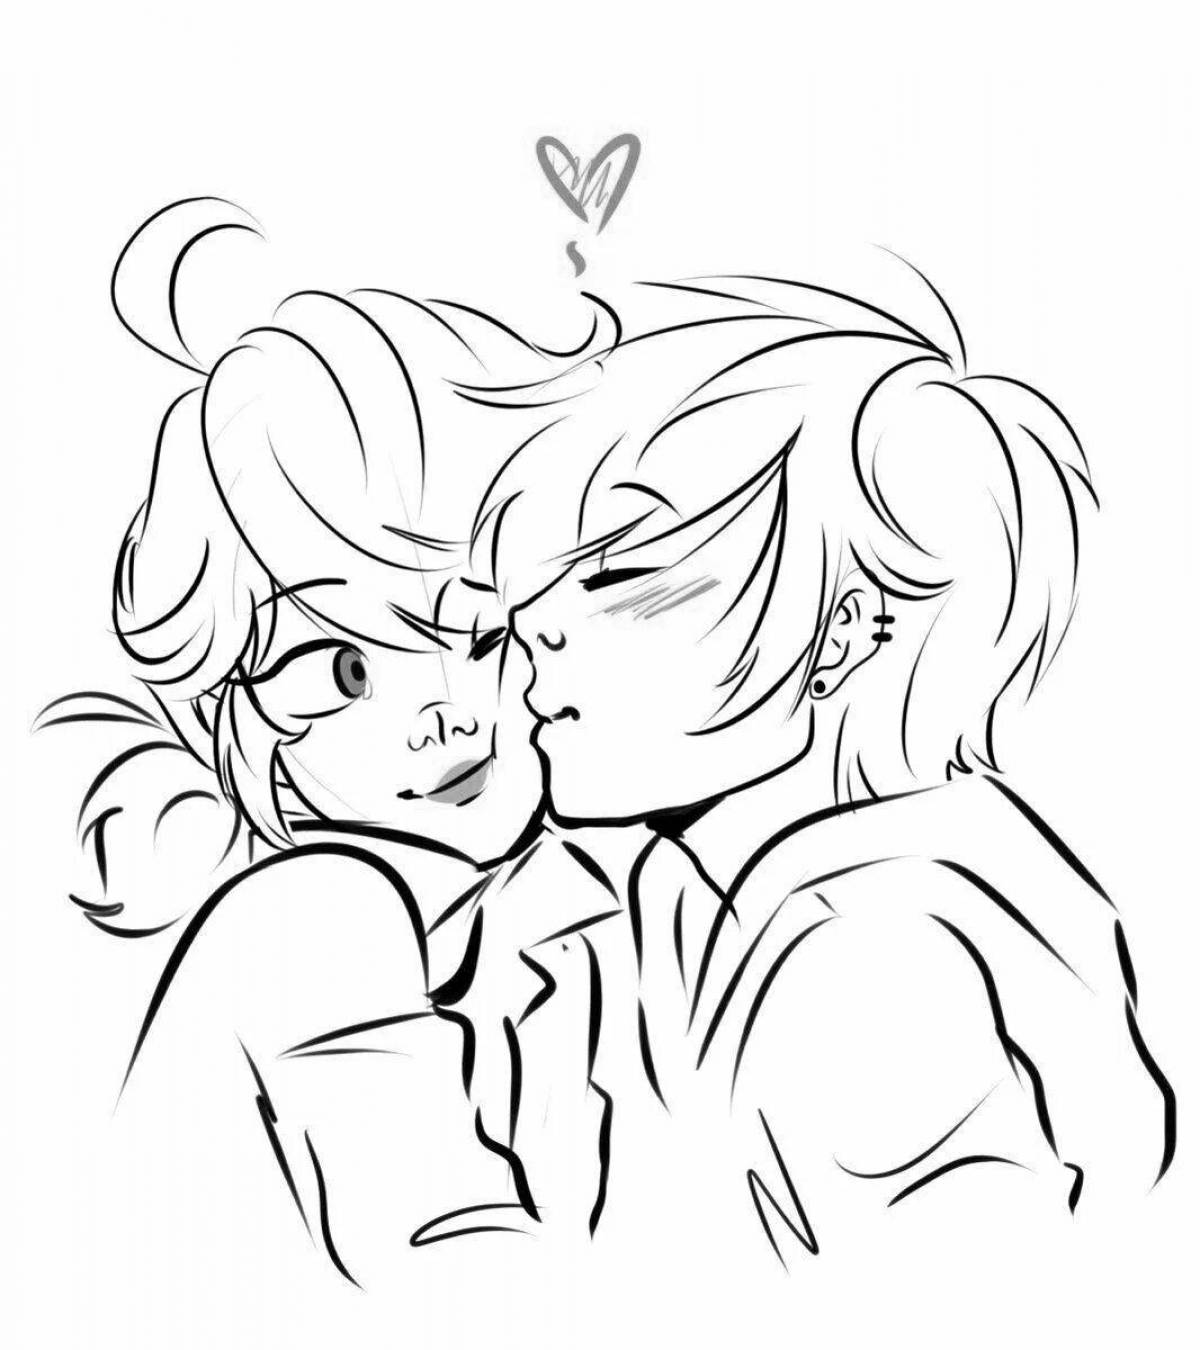 Marinette and adrian coloring pages